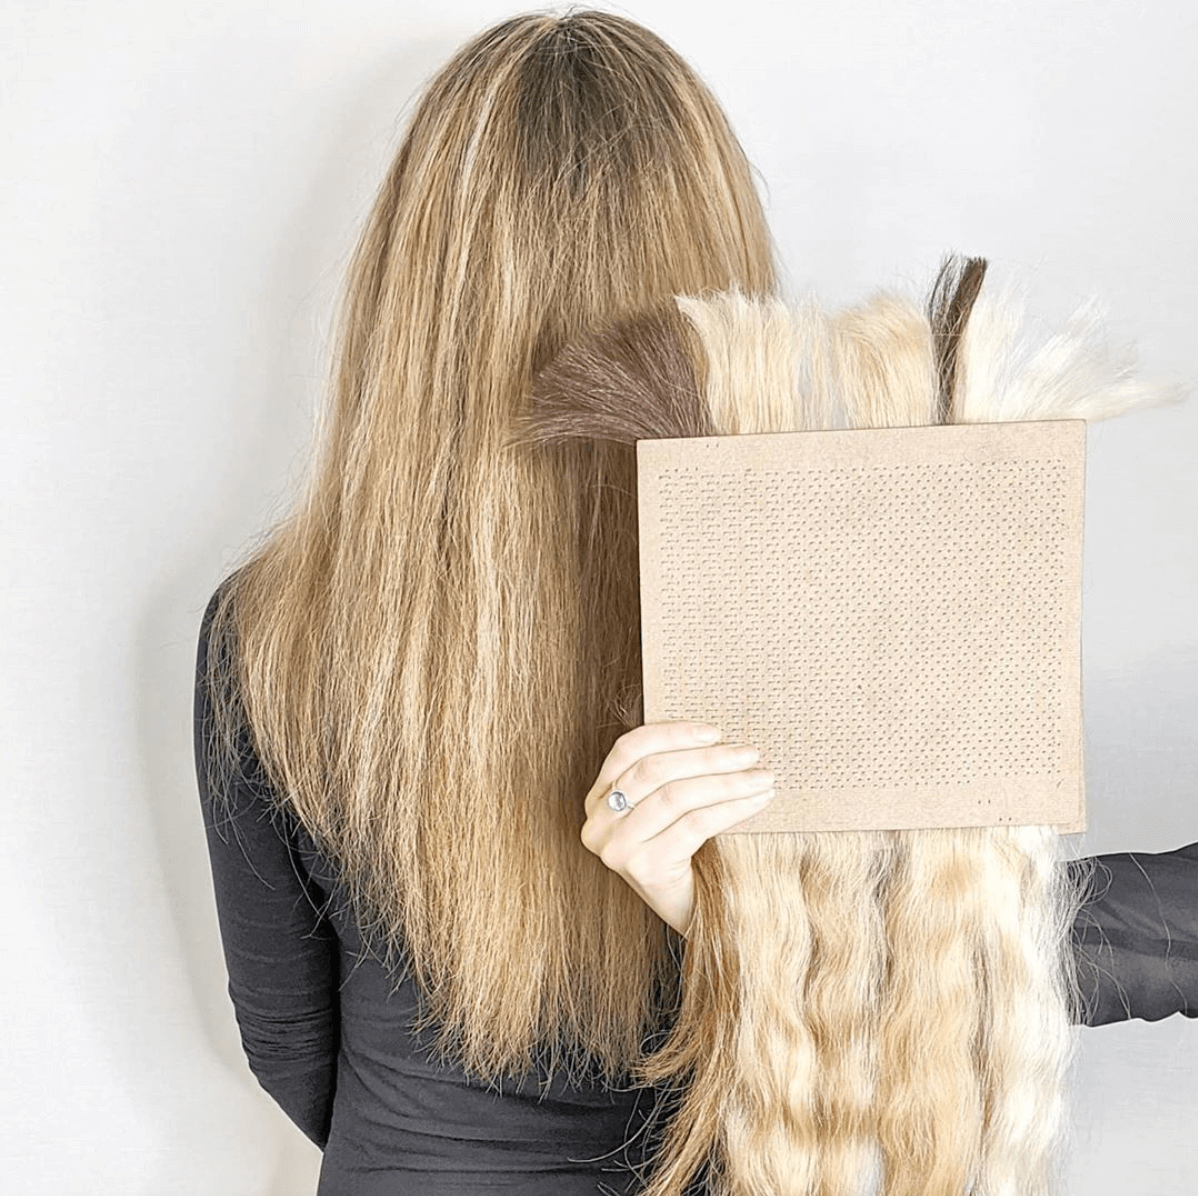 Colour matching blond hair extension to real hair